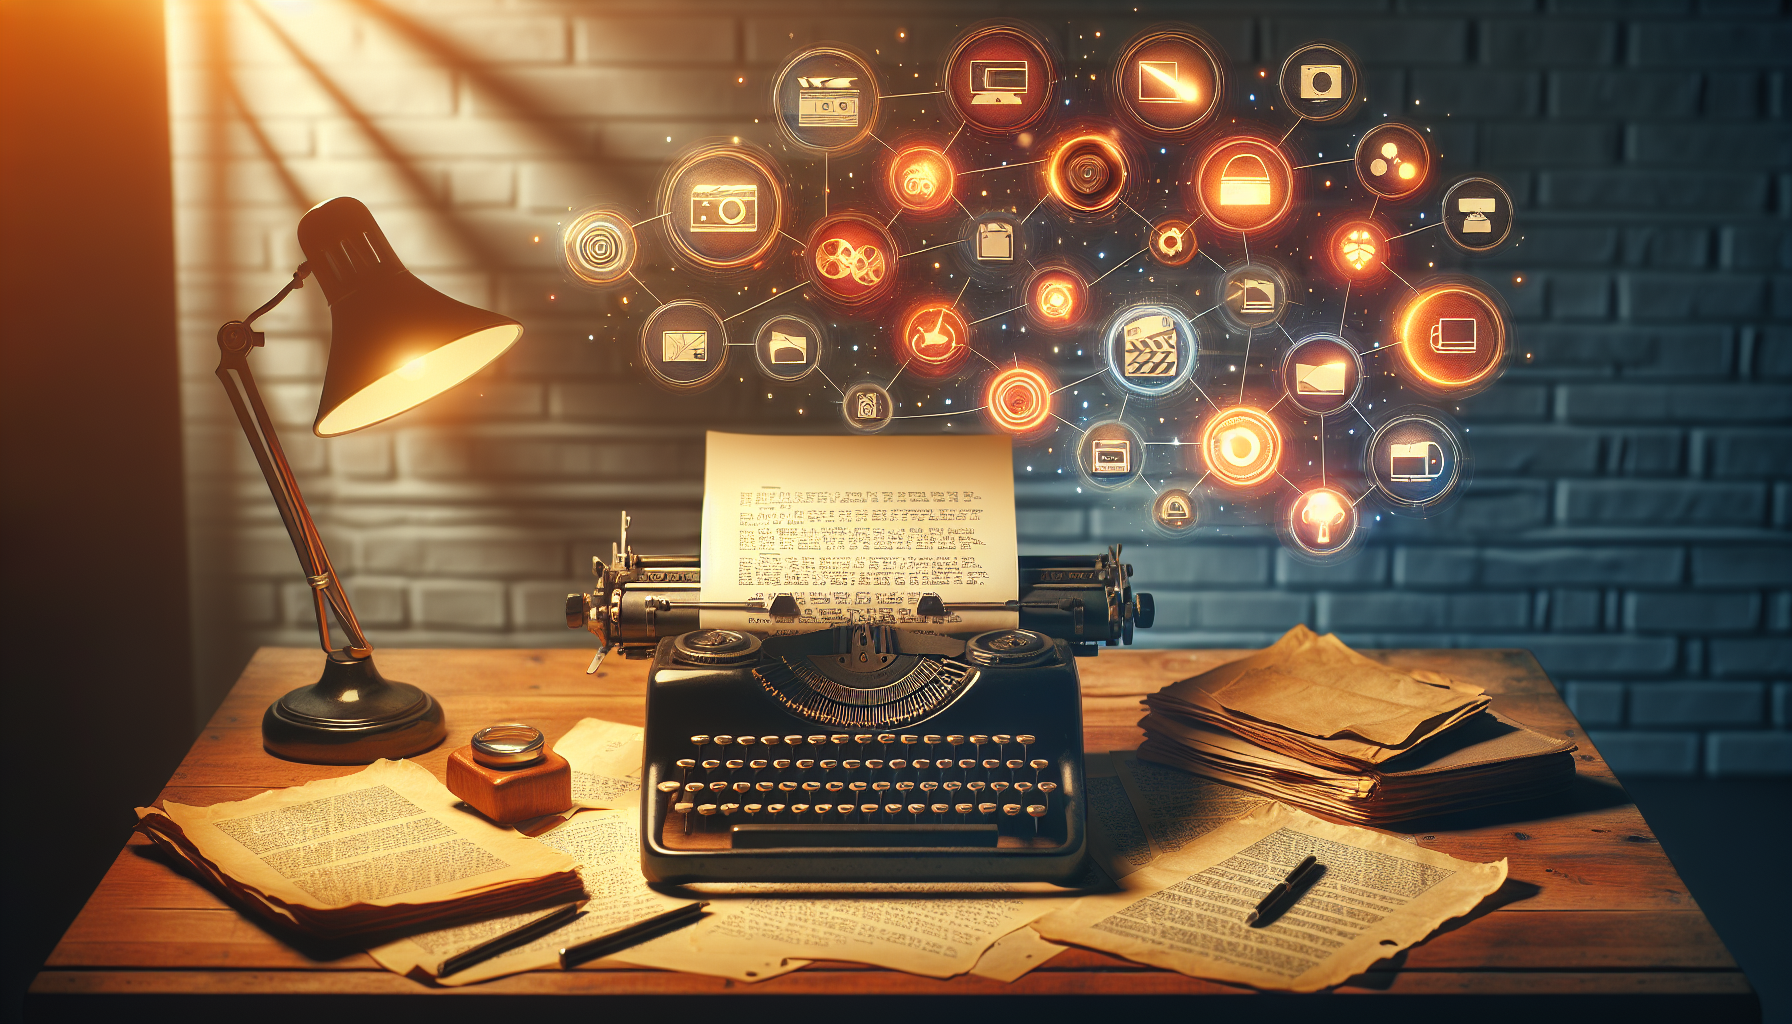 An elegant vintage typewriter on a wooden desk with scattered screenplay pages, a dimly lit lamp casting warm light over the scene, and conceptual icons representing montage techniques floating above